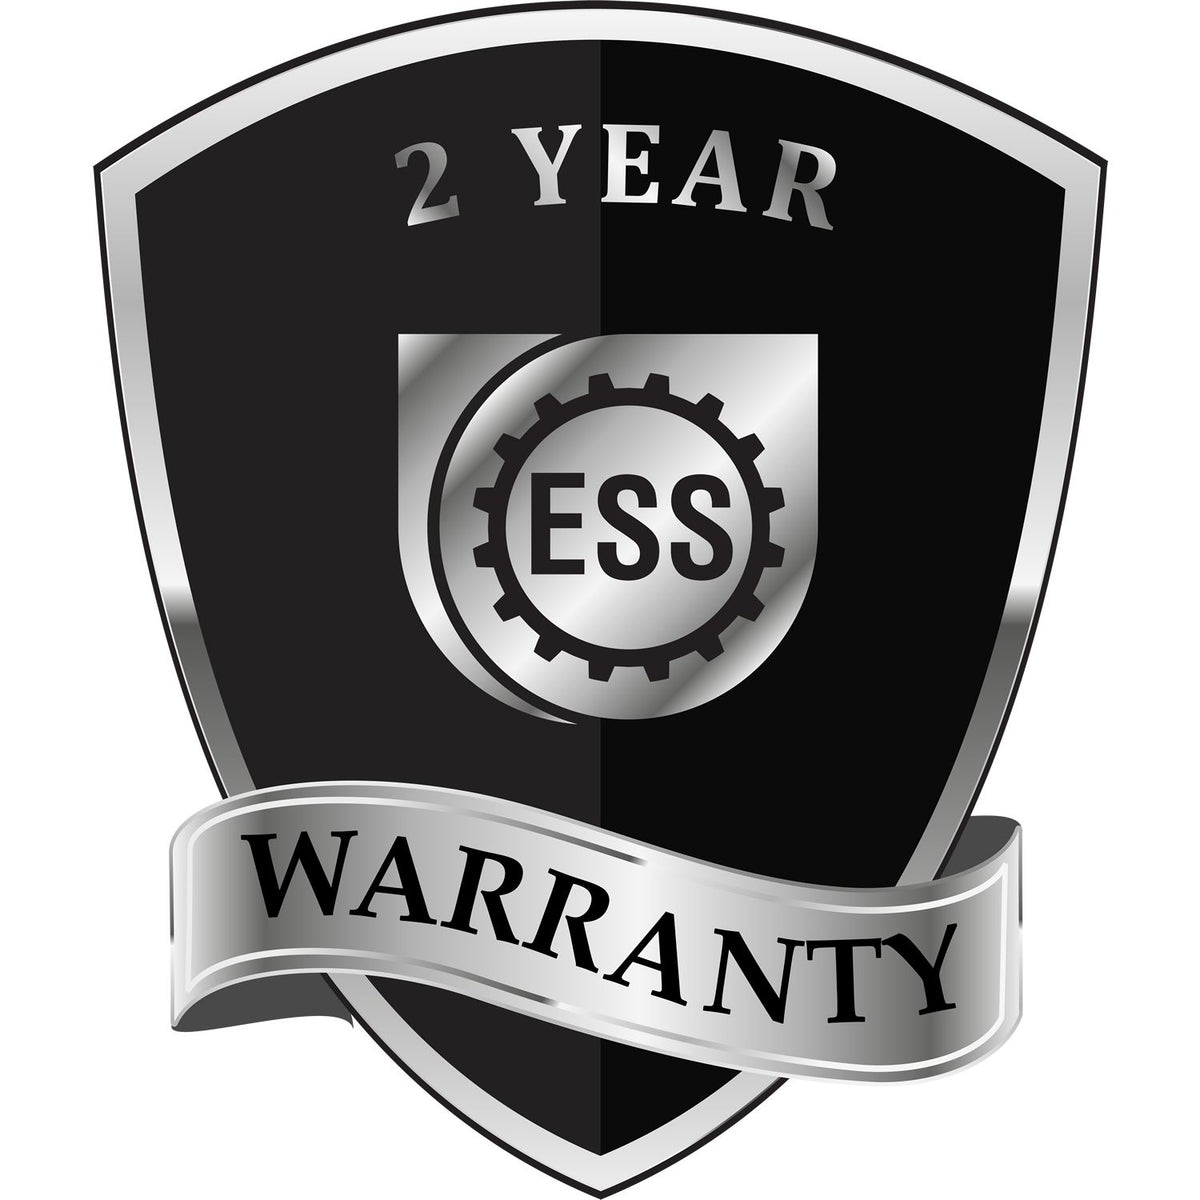 A badge or emblem showing a warranty icon for the Extended Long Reach Maine Surveyor Embosser